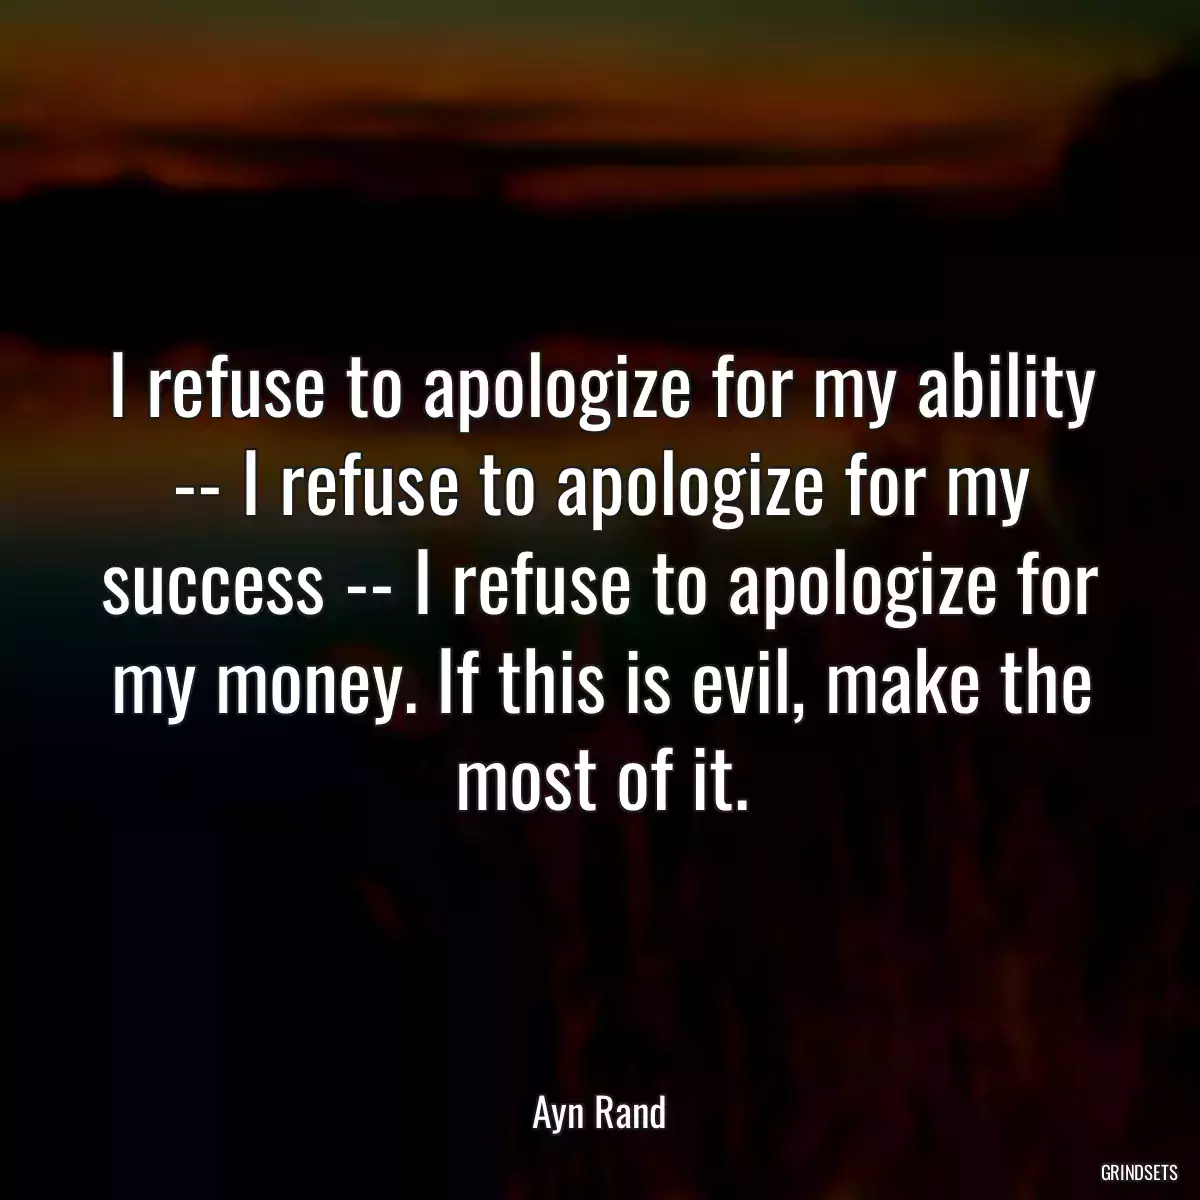 I refuse to apologize for my ability -- I refuse to apologize for my success -- I refuse to apologize for my money. If this is evil, make the most of it.